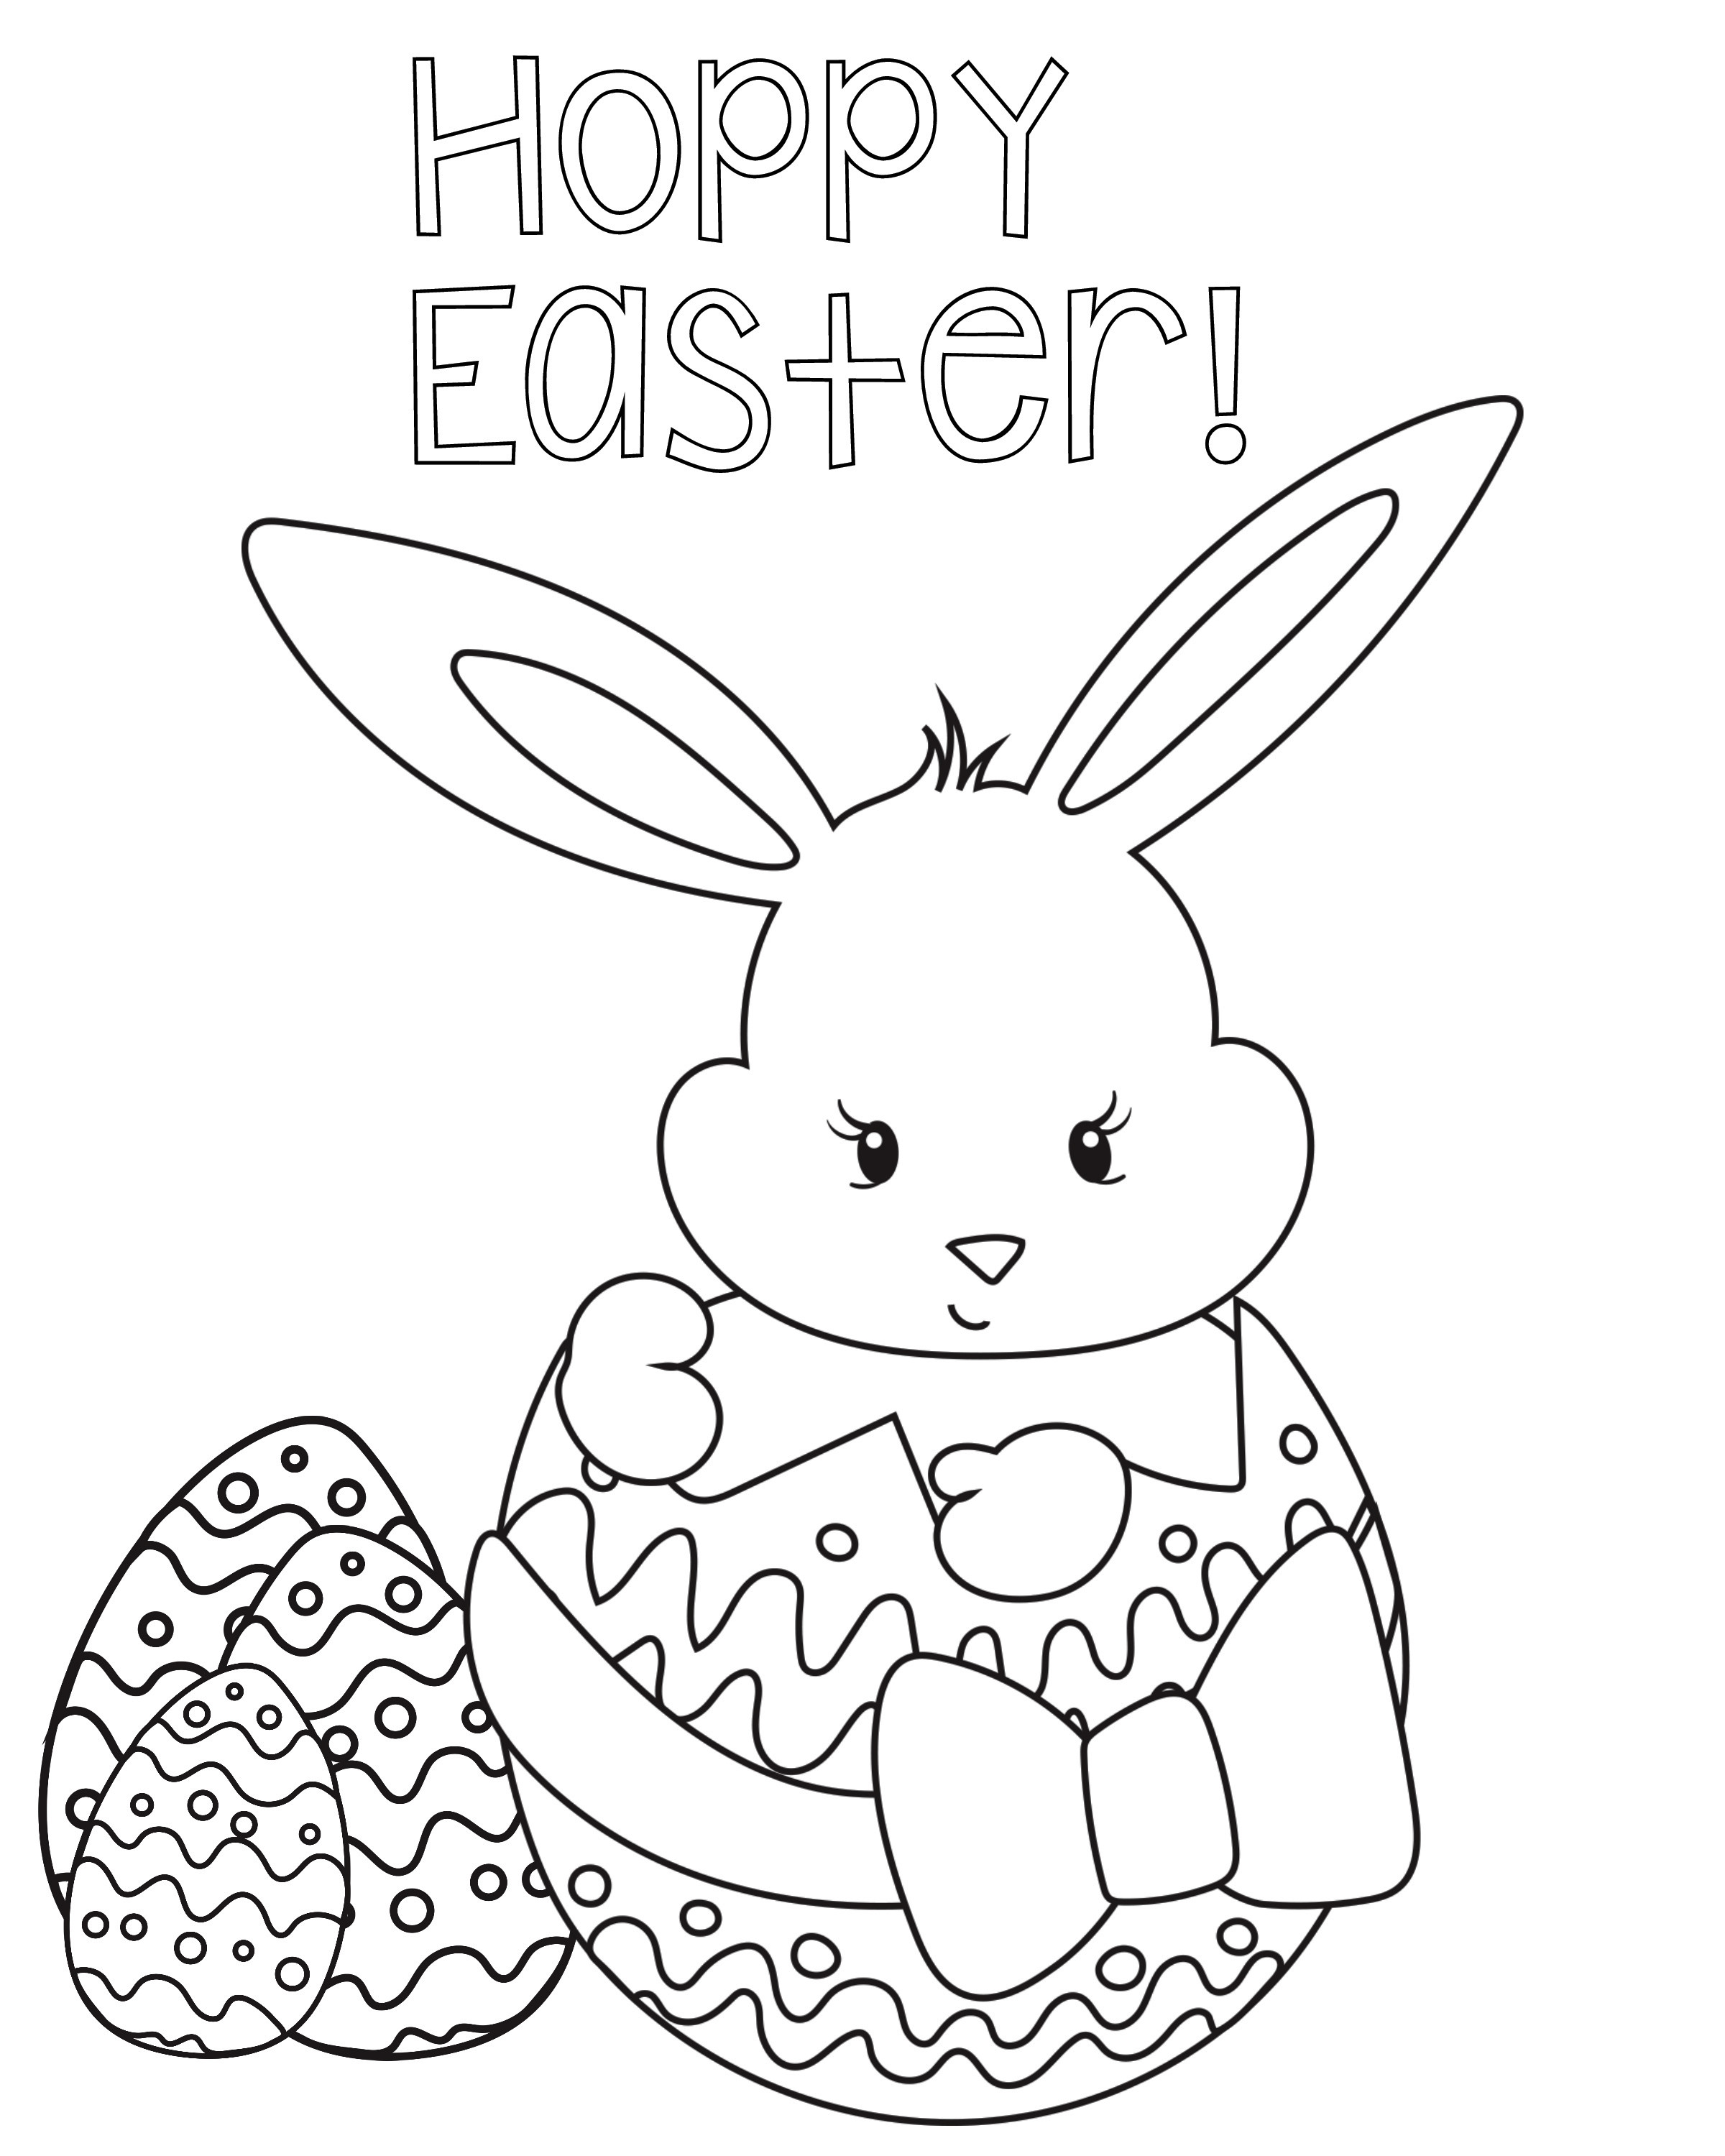 Printable Coloring Pages For Easter
 Easter Coloring Pages Best Coloring Pages For Kids